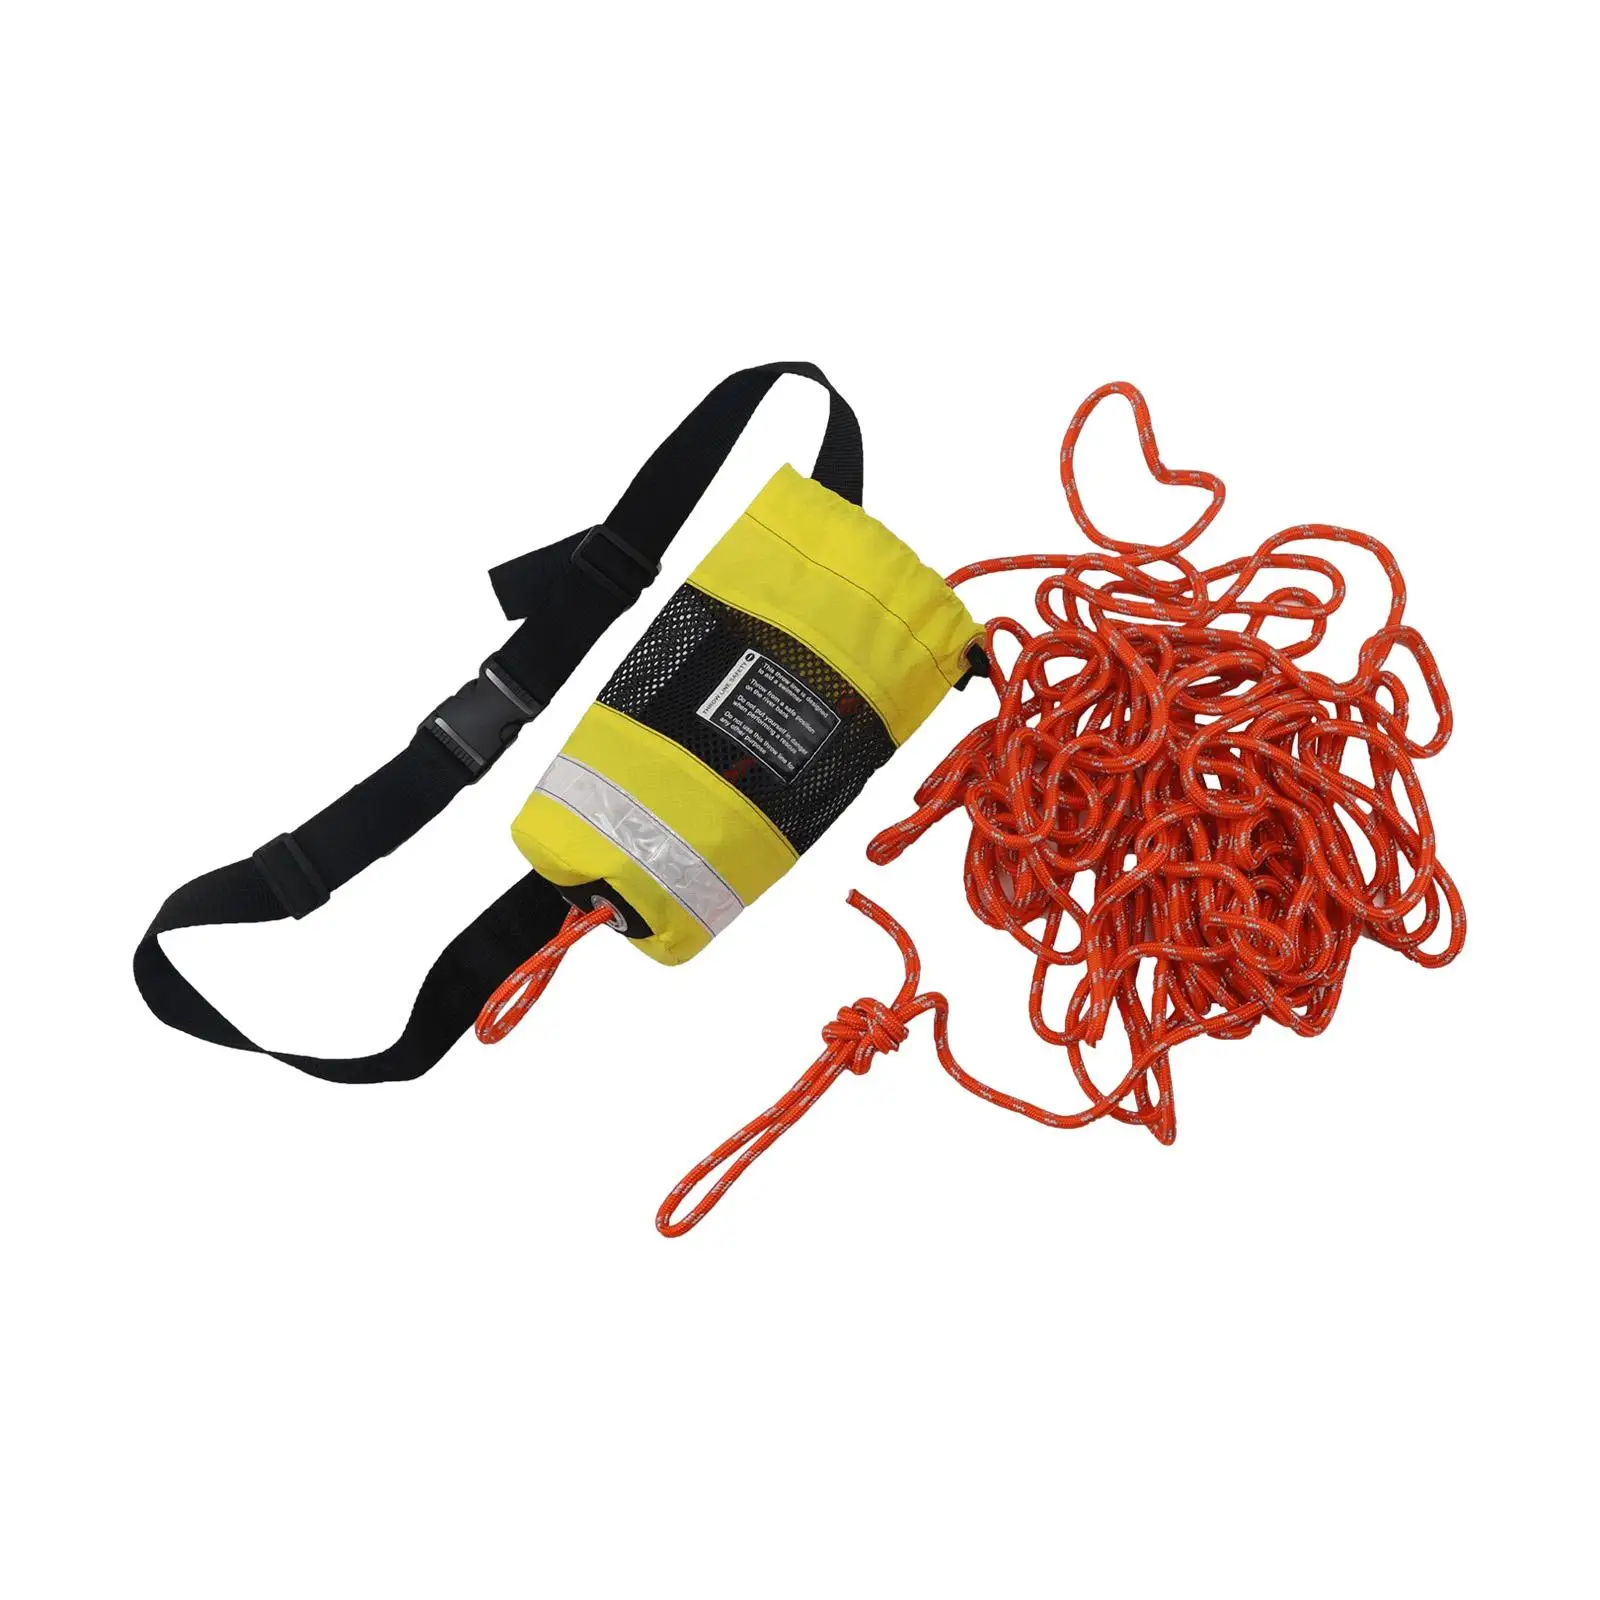 Portable Rope Throw Bag Reflective High Visibility 21M Length for Boating, Water Sports Kayaking, Sailing, Accessory